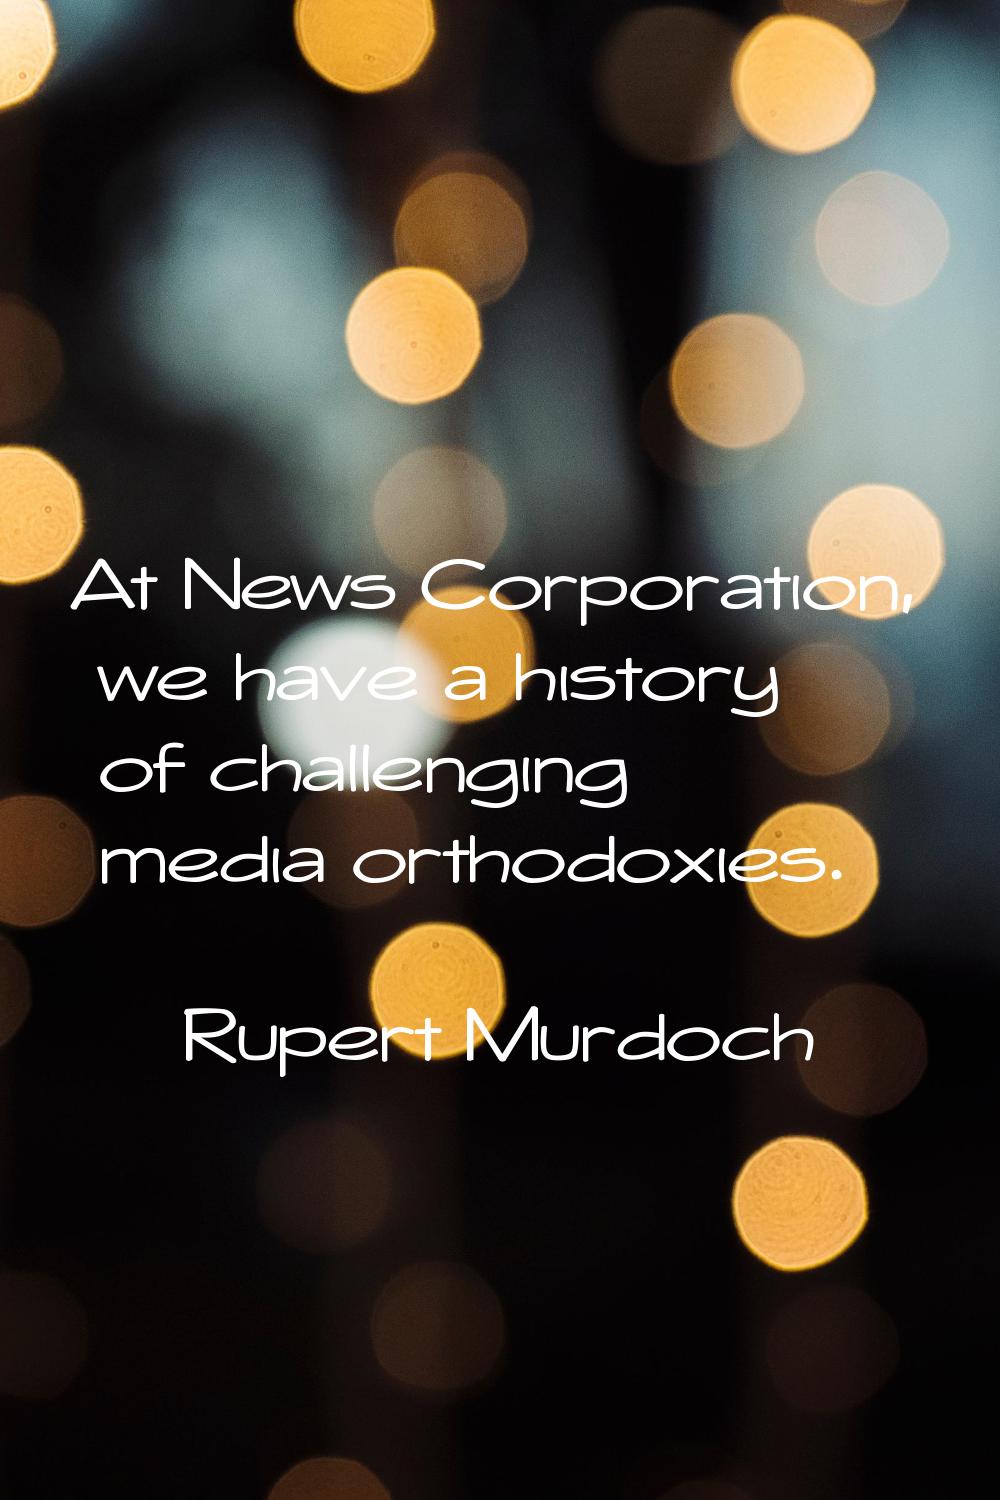 At News Corporation, we have a history of challenging media orthodoxies.